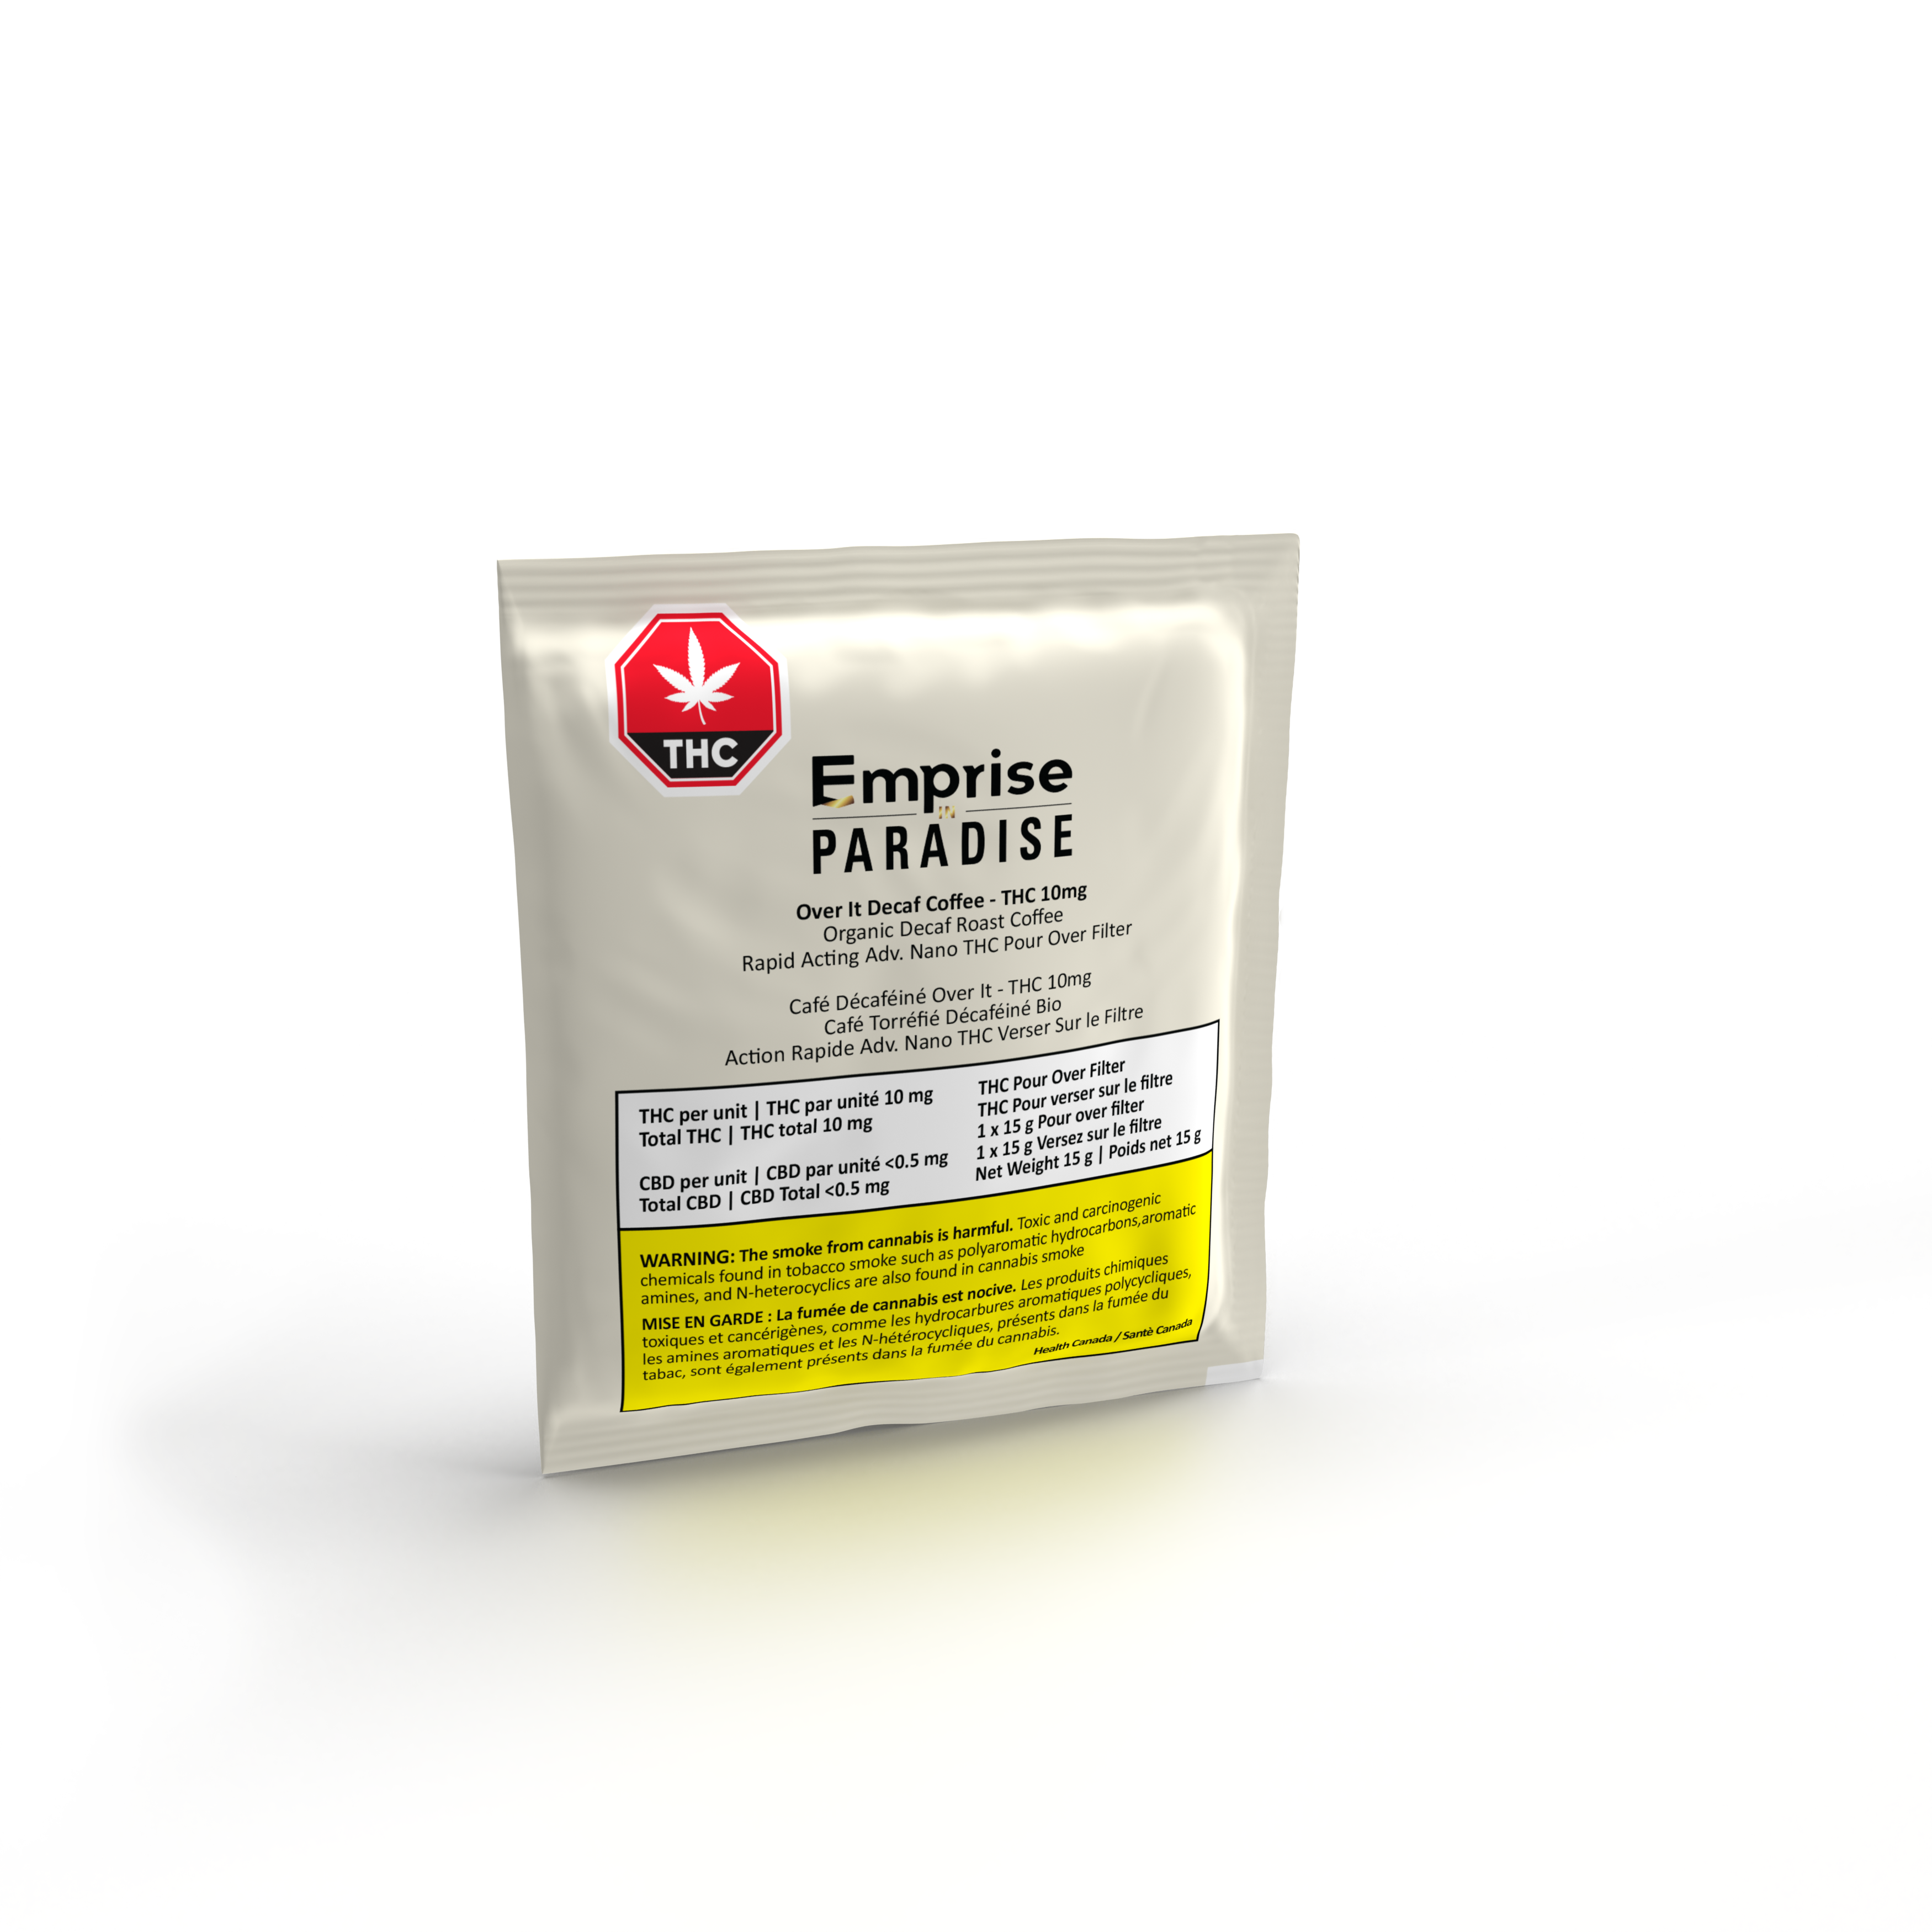 Cannabis Product Over It Organic Decaf Coffee - 10mg Rapid Nano THC by Emprise in Paradise